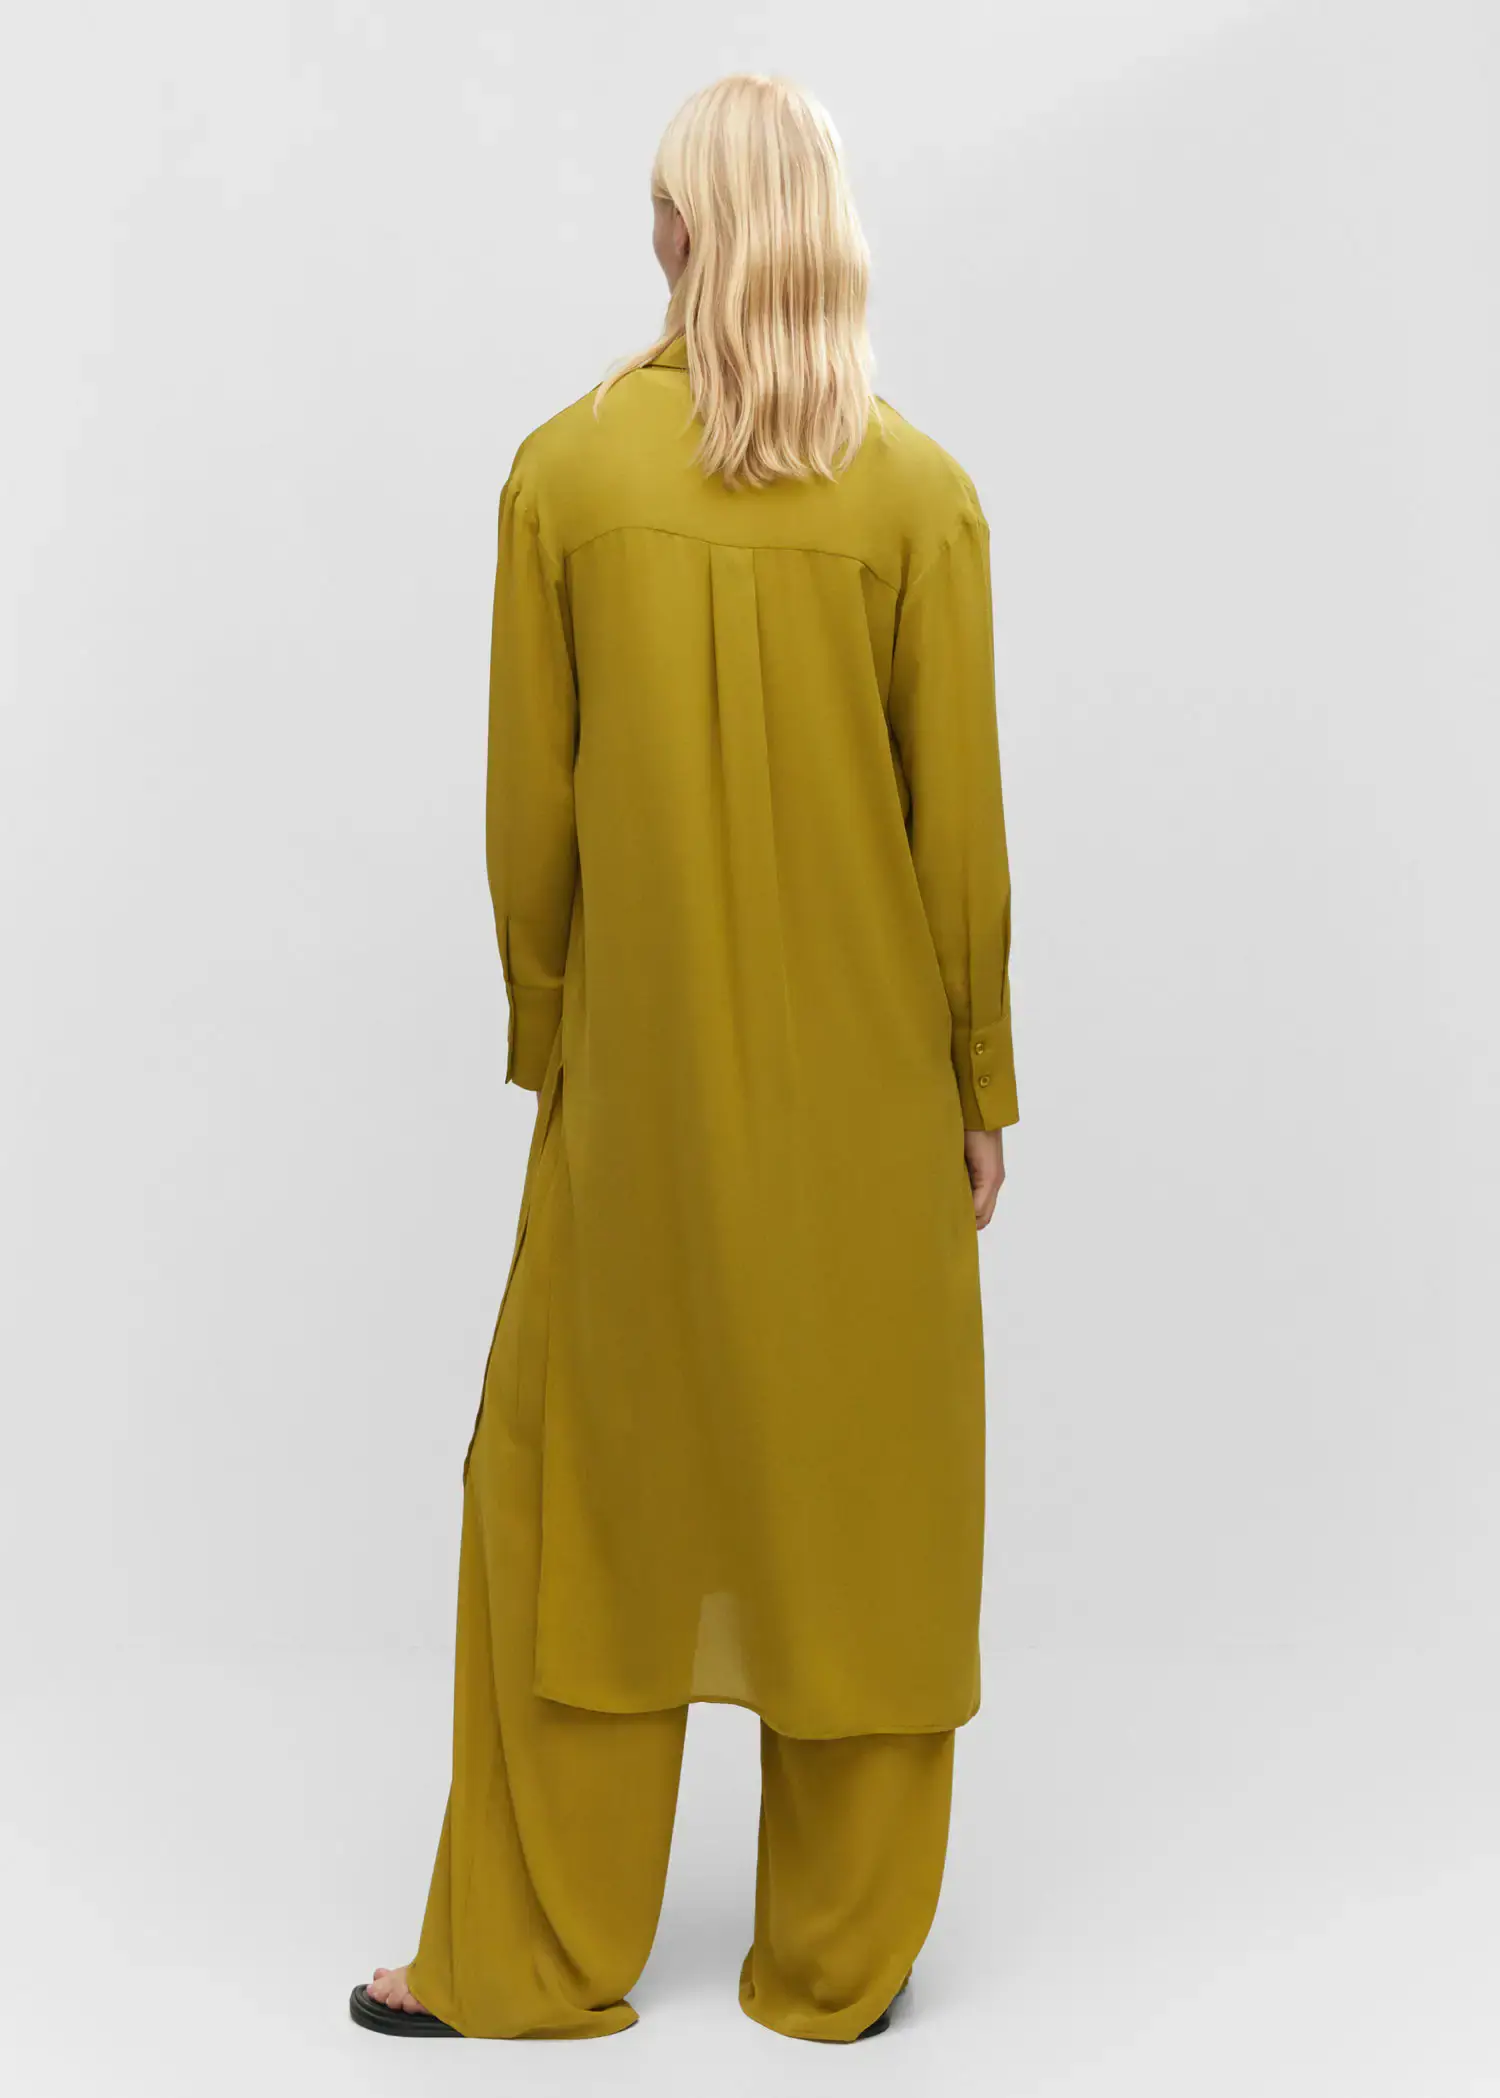 Mango Shirt dress with slits. a person wearing a yellow outfit standing next to a wall. 